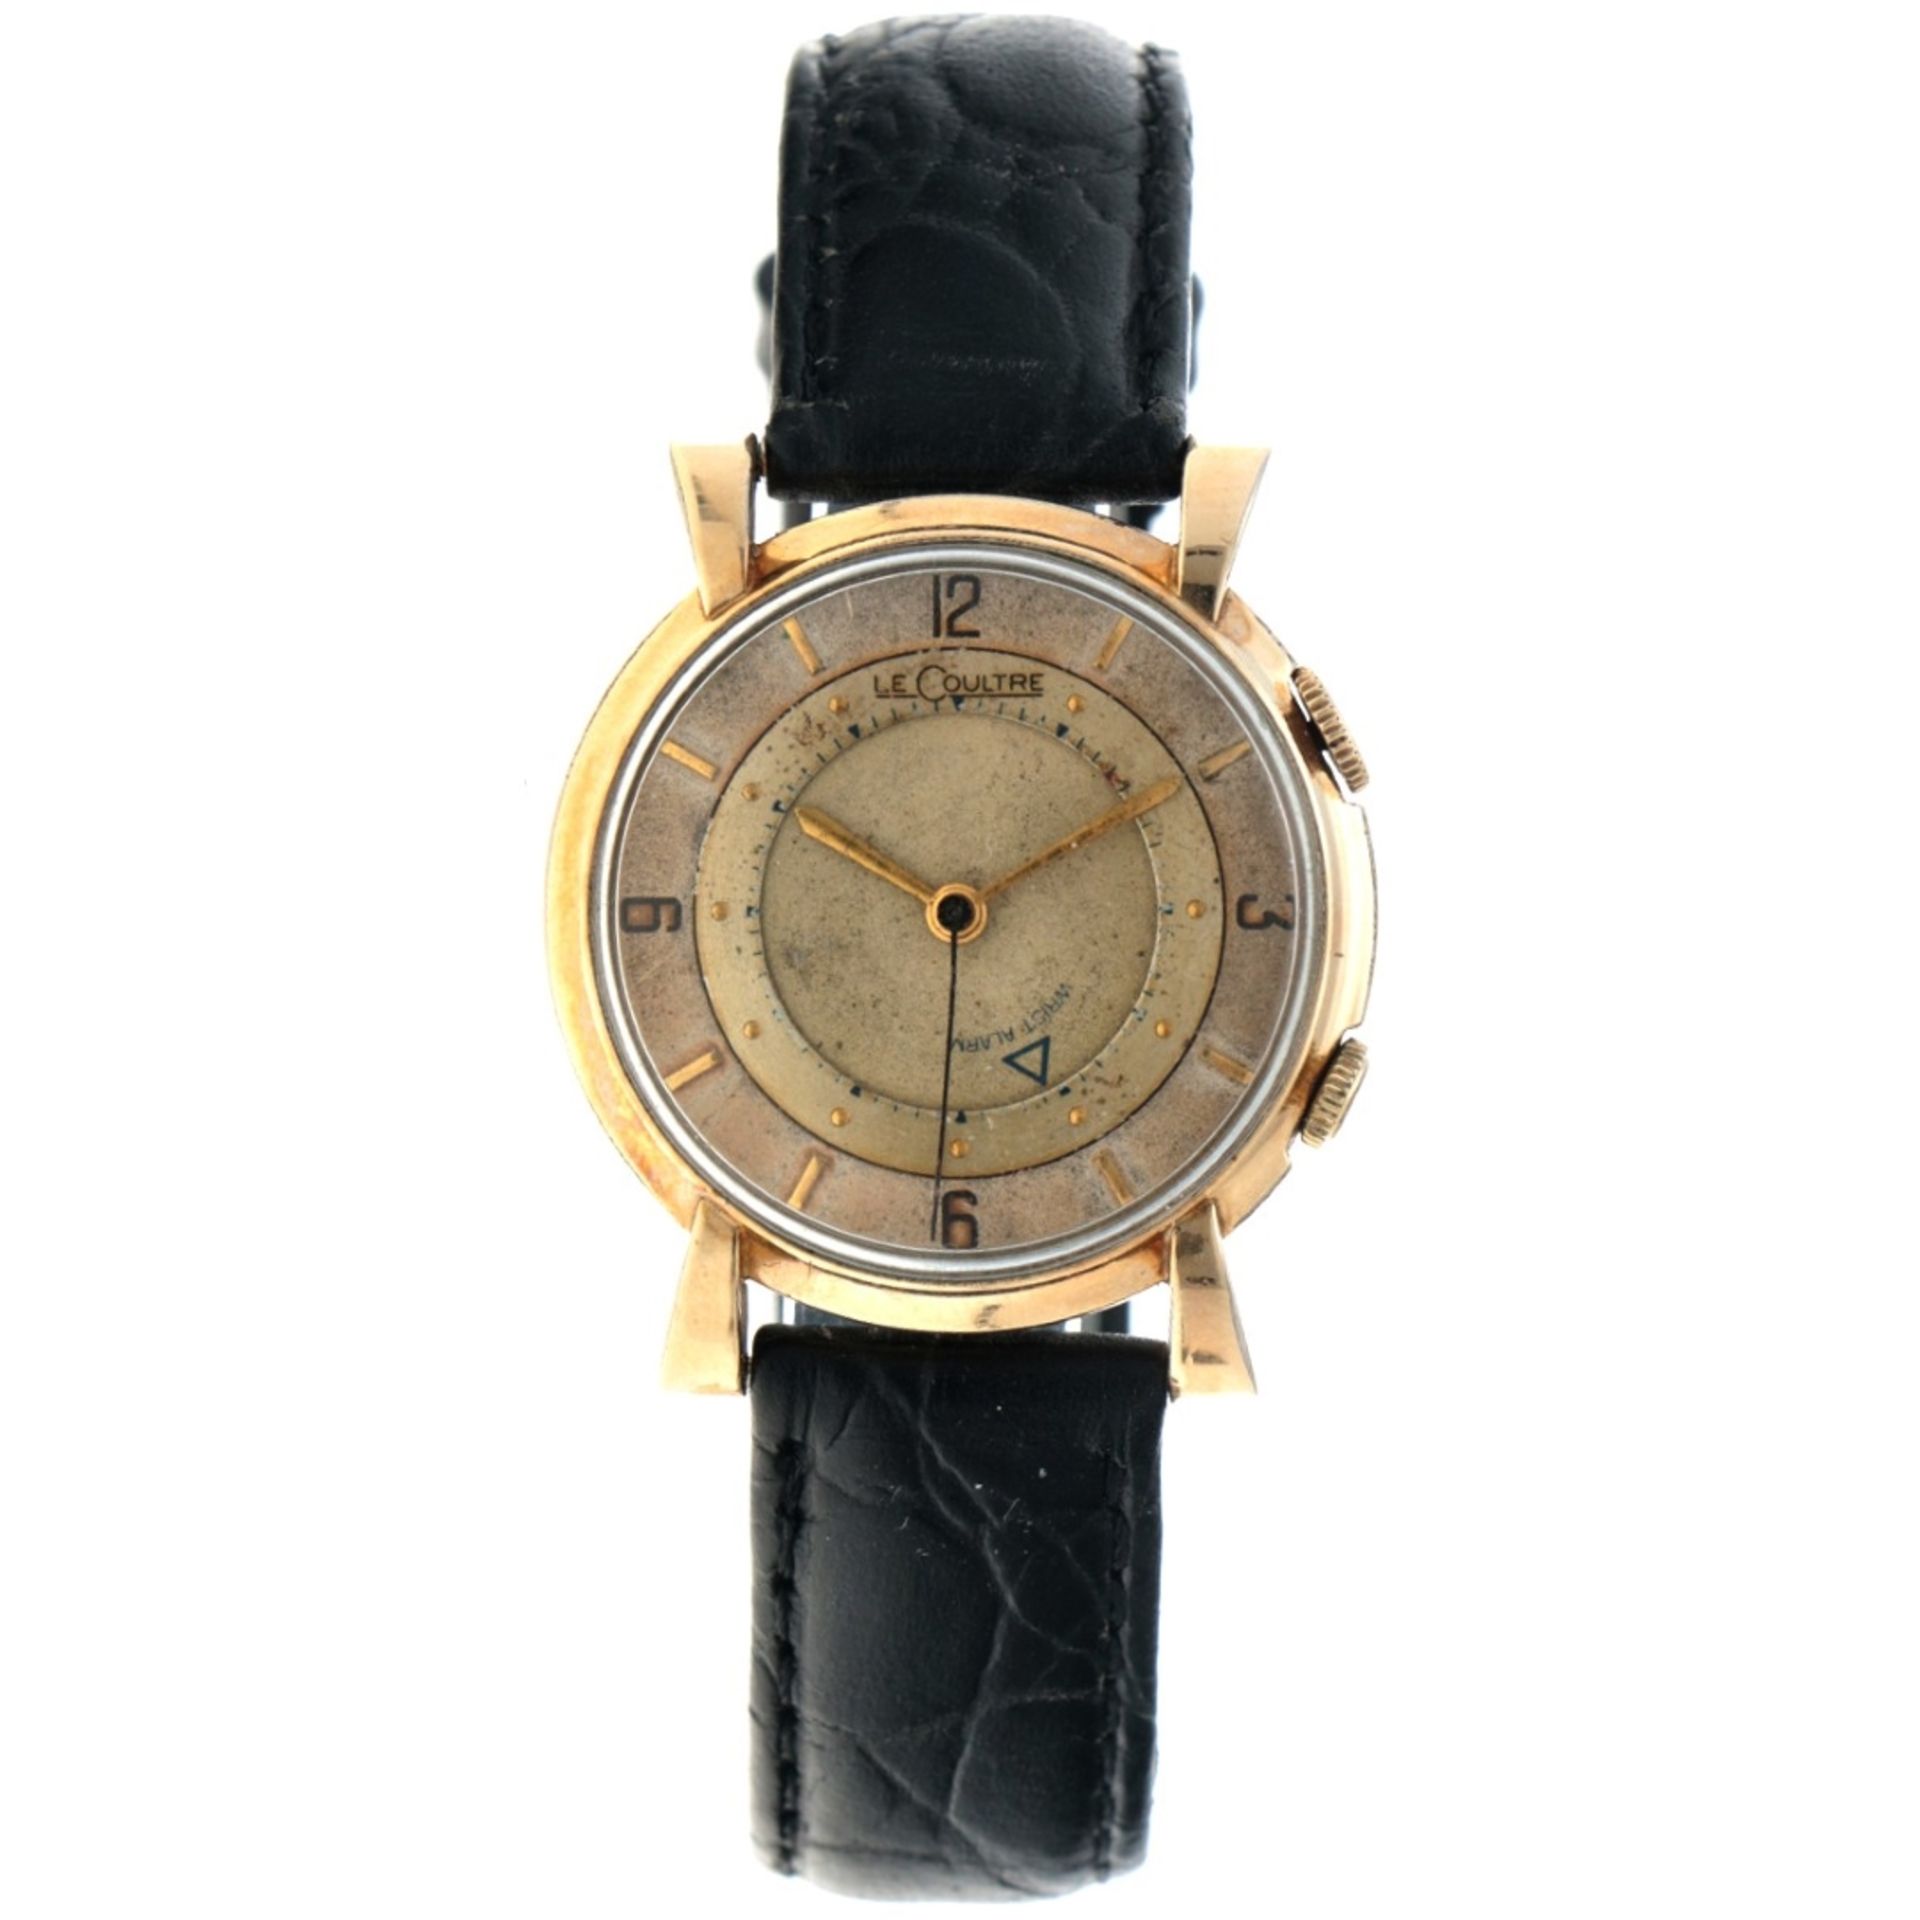 No Reserve - LeCoultre Memovox Cal. 489/1 - Men's watch - approx. 1950's.